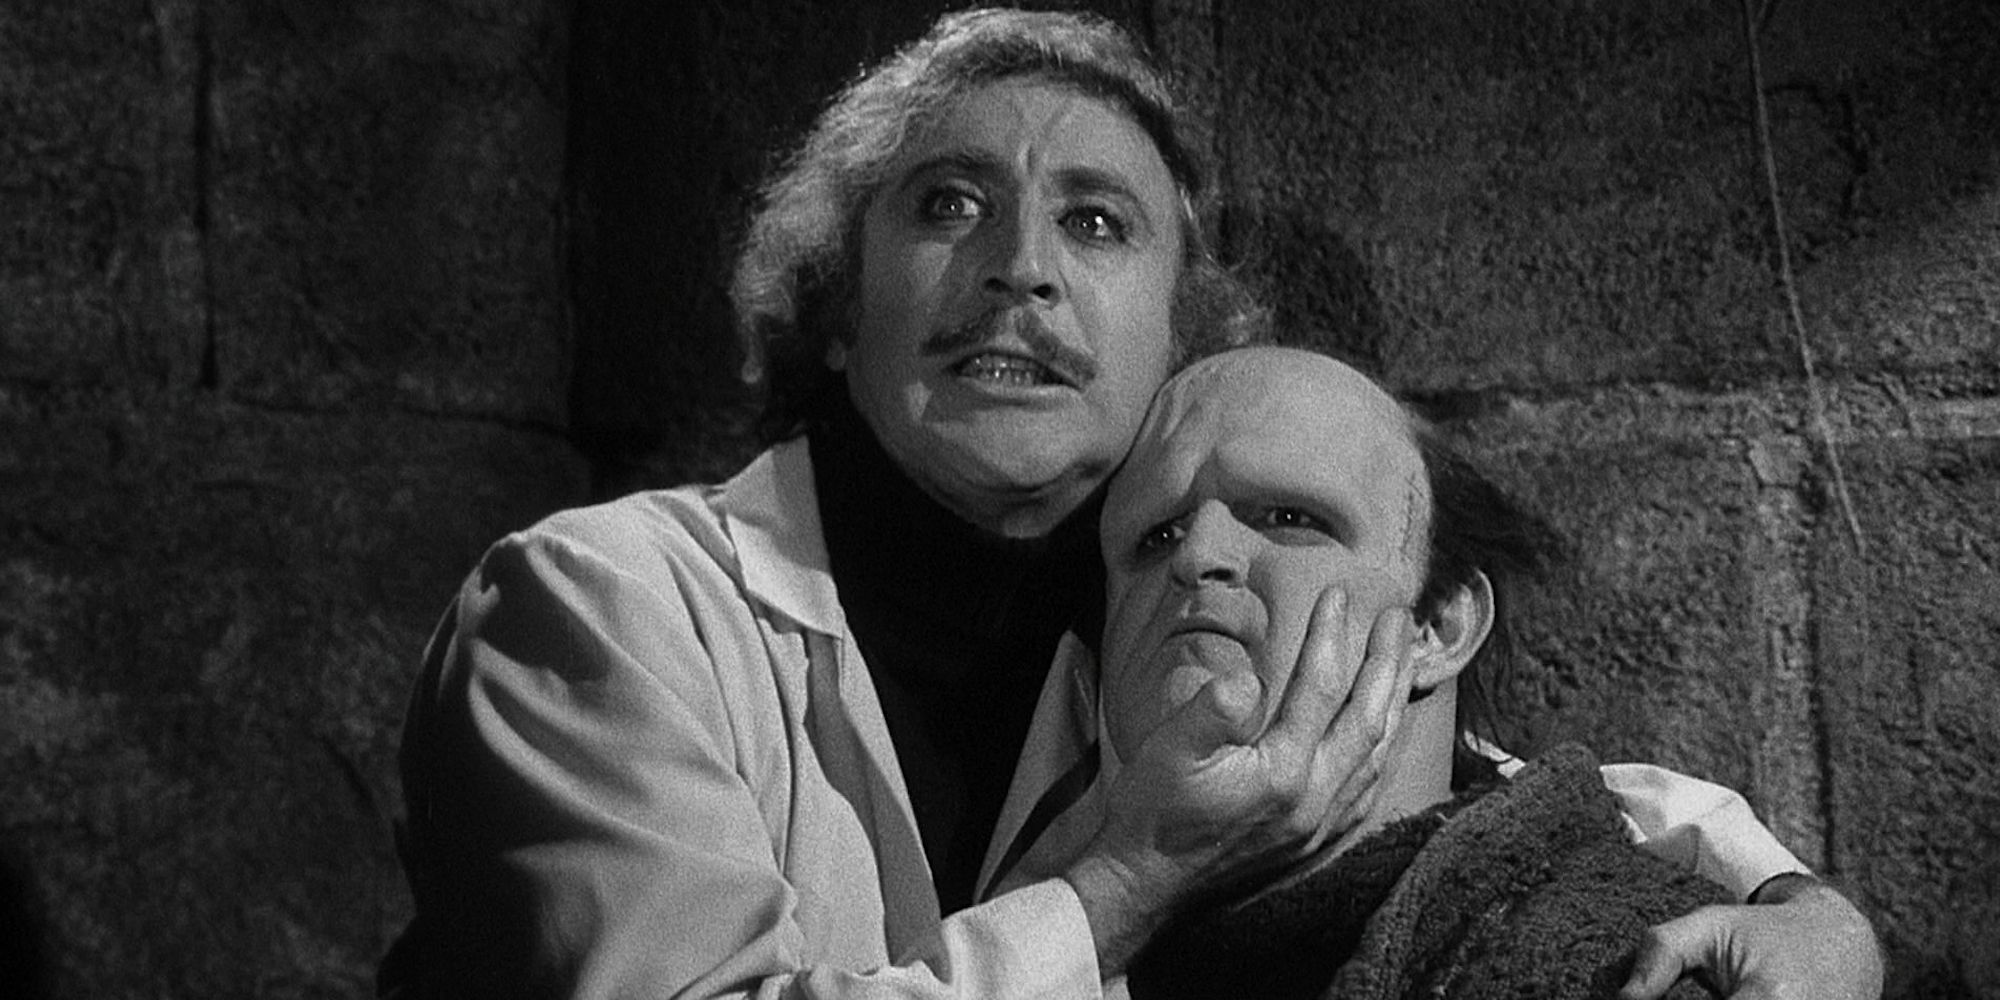 Dr. Frederick Frankenstein (Gene Wilder) holds the face of the Monster (Peter Boyle) as he glares with manic intensity.